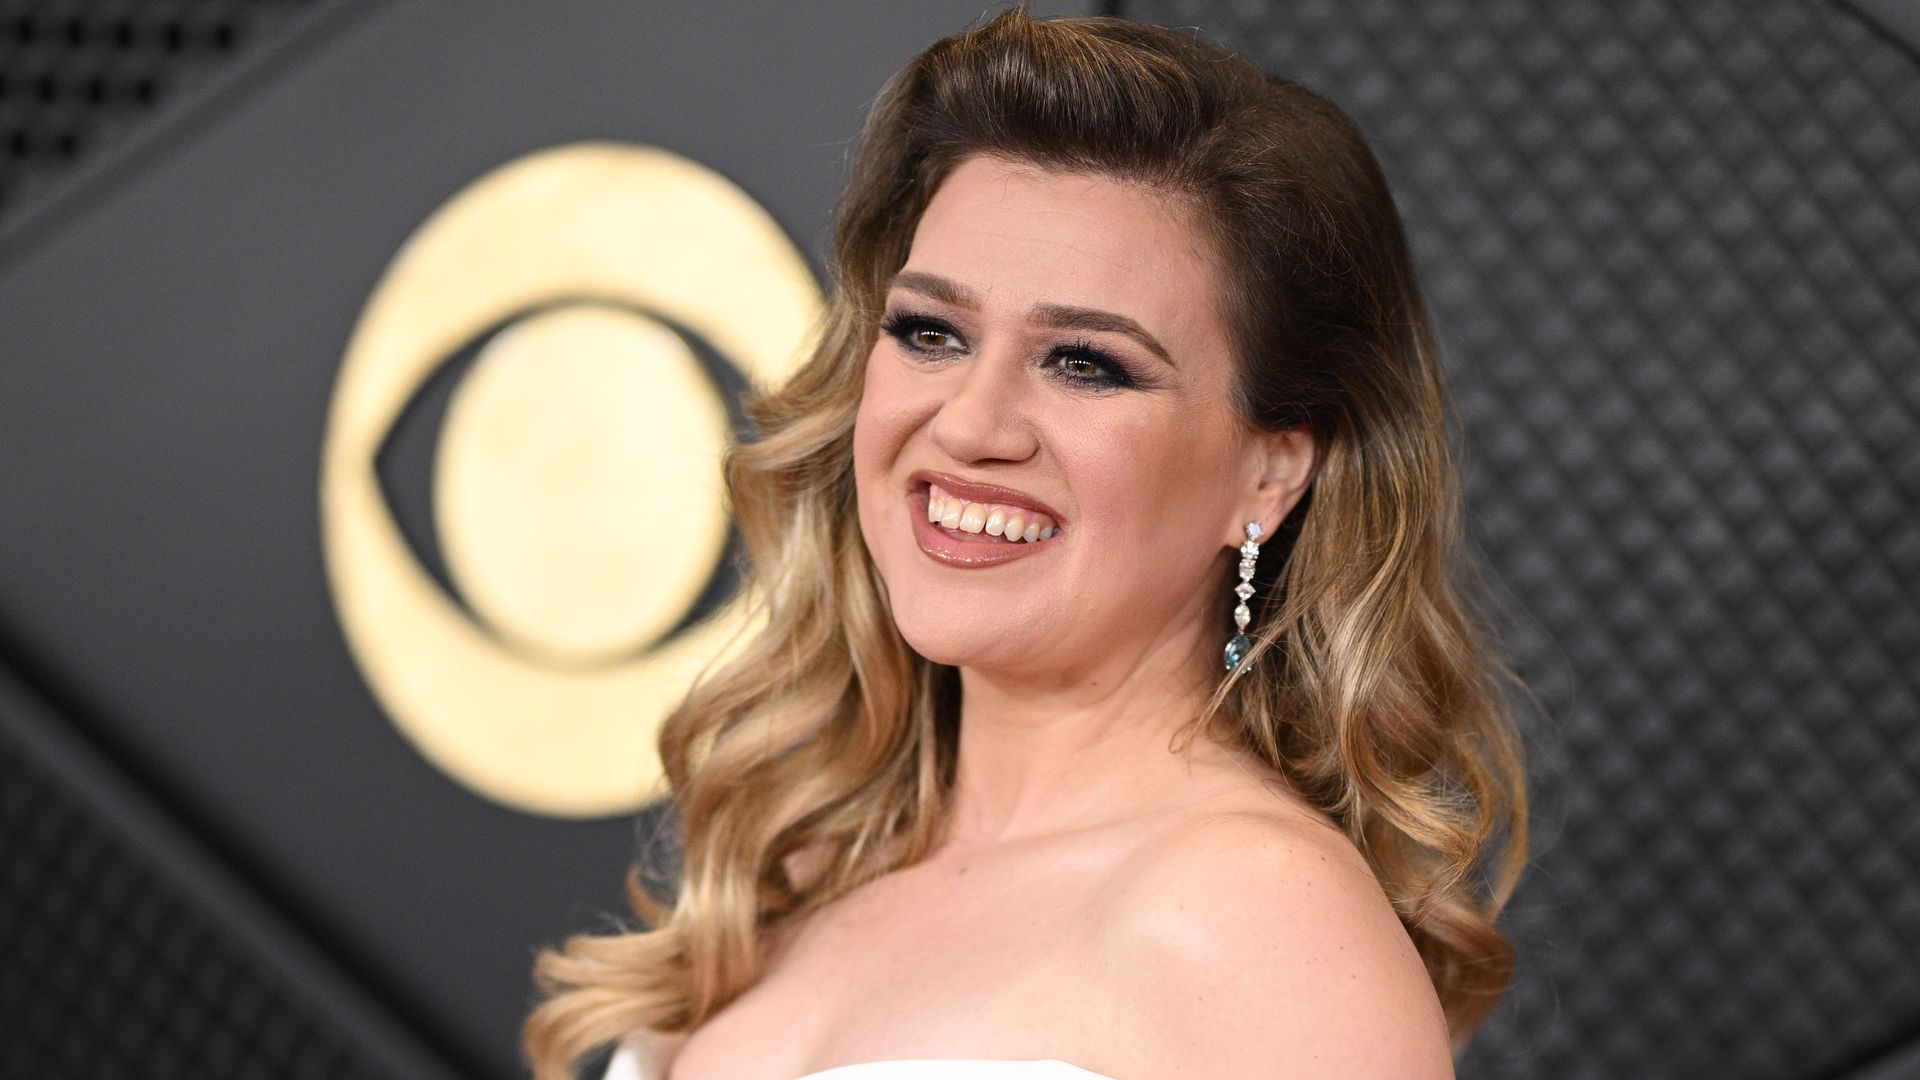 Kelly Clarkson stuns in sky-high heels and shorts set you can't miss